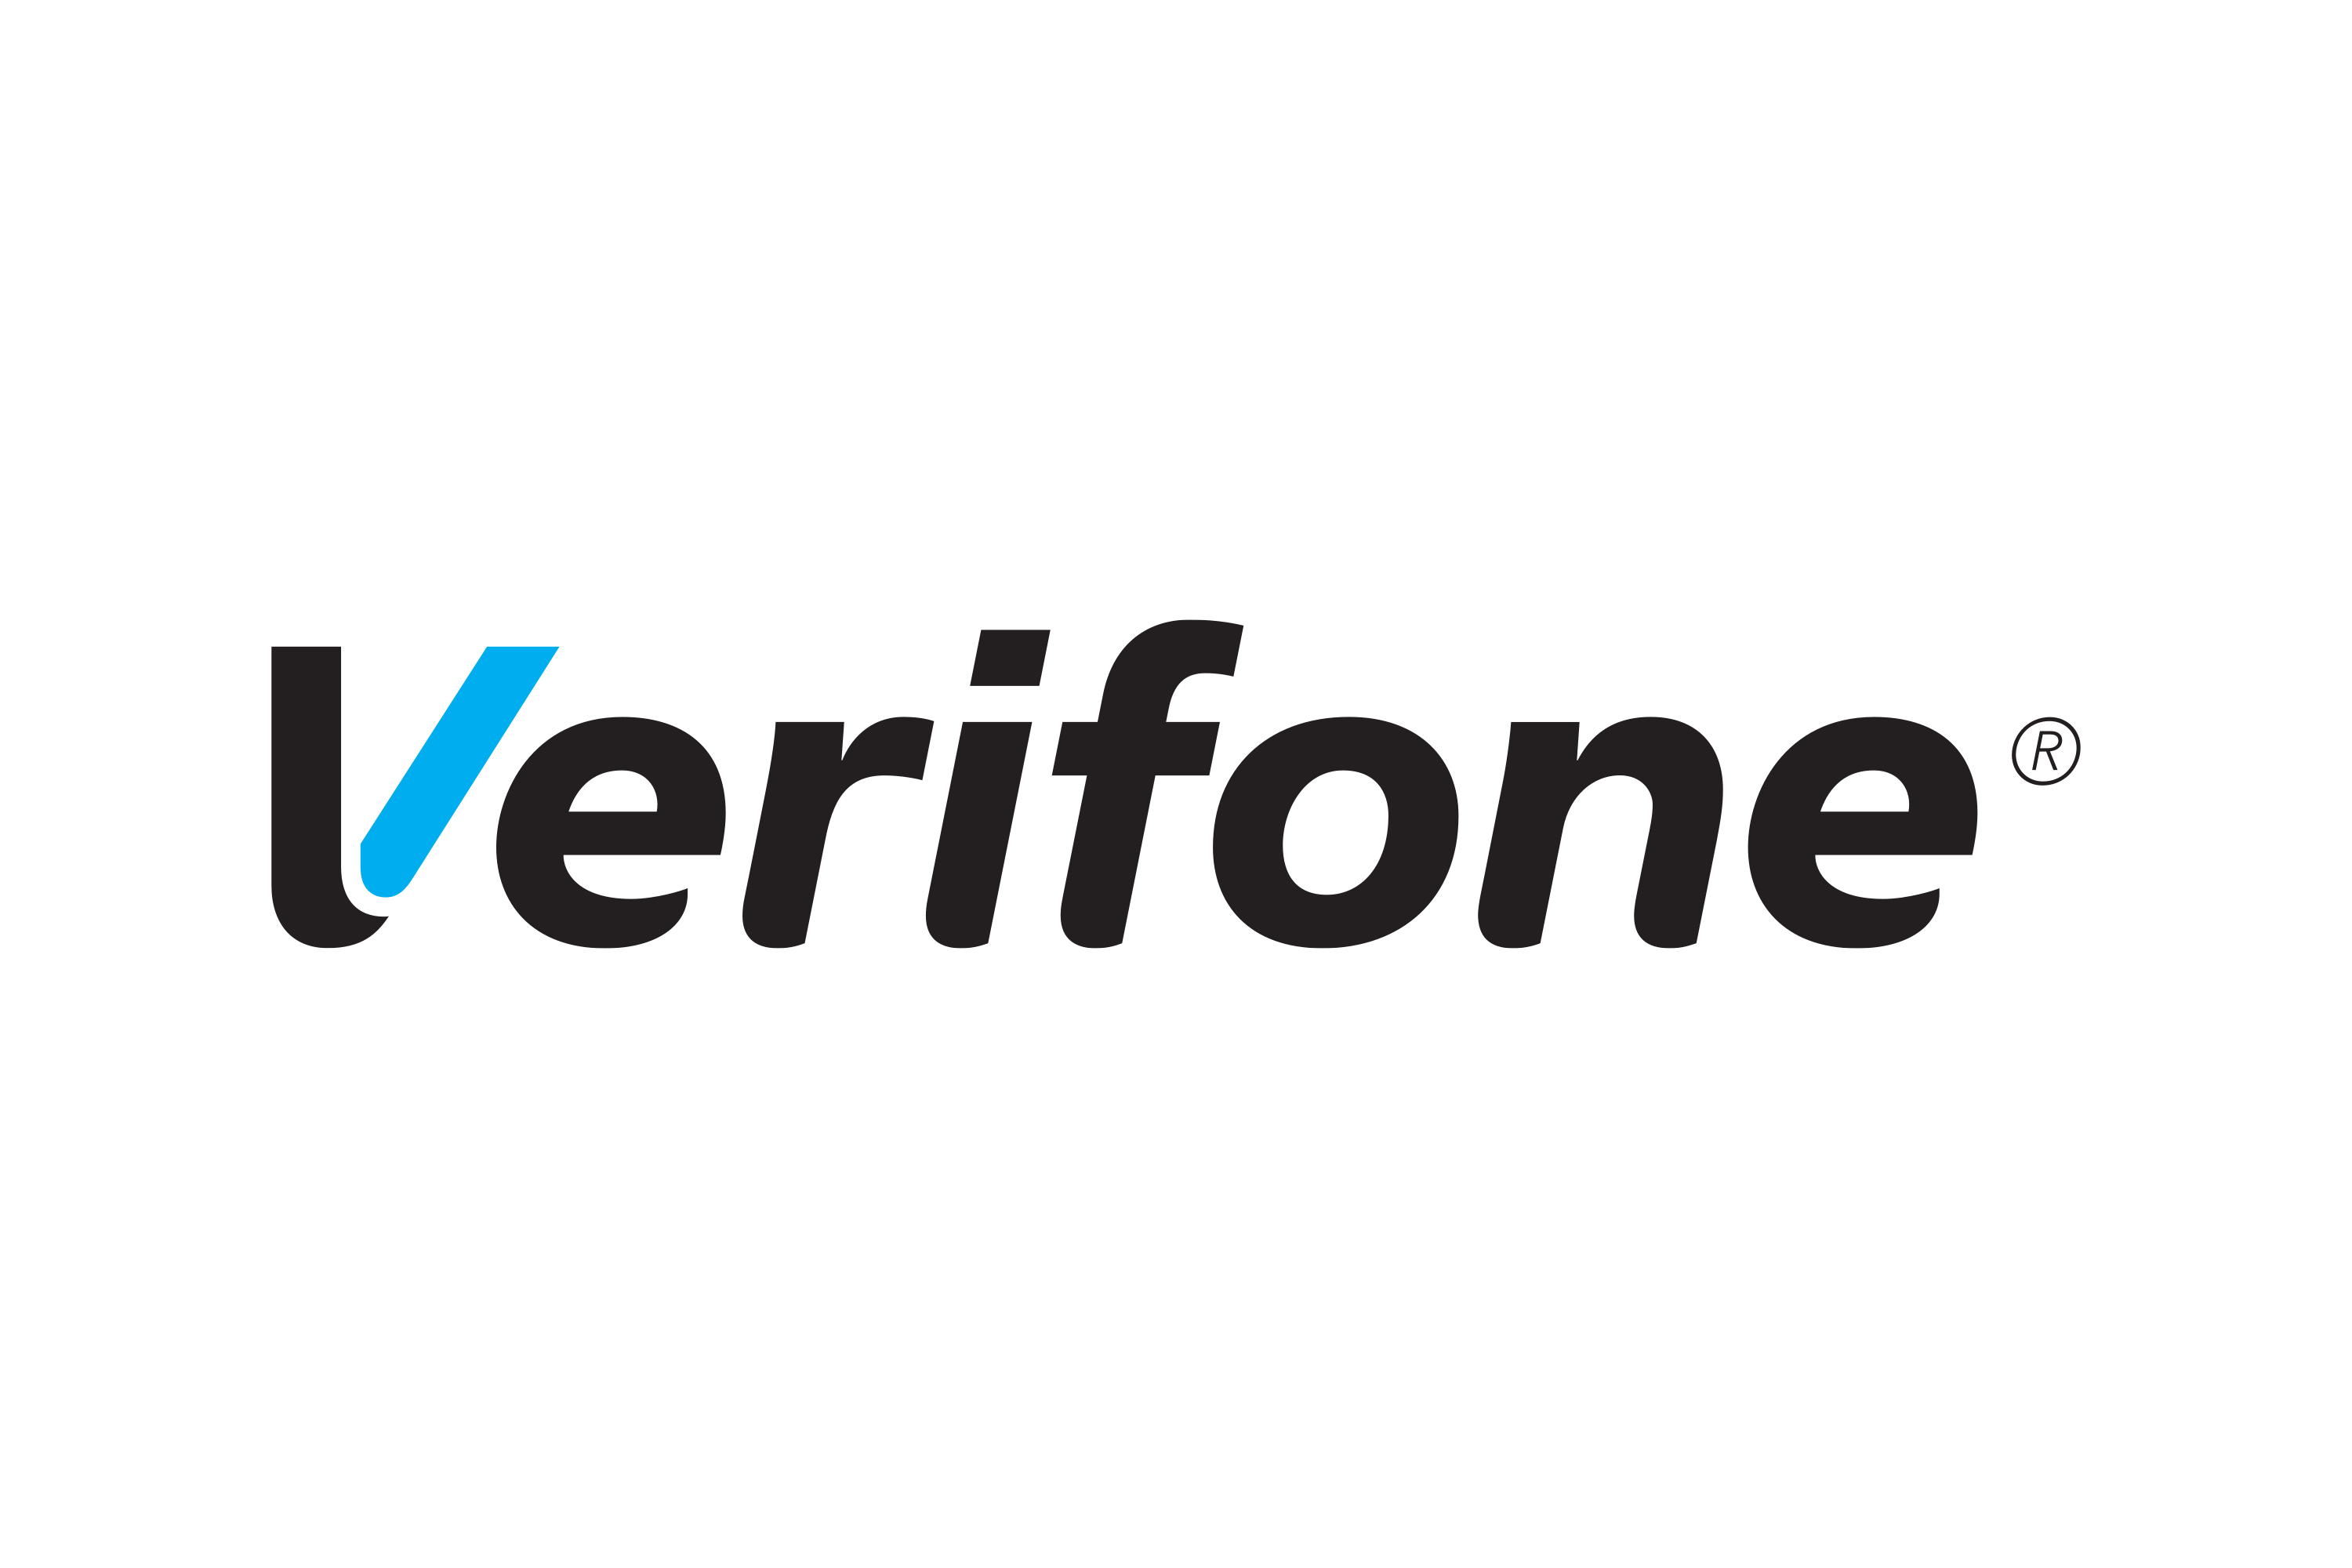 Your payments will be securely processed by Verifone (ex-2checkout,ex-Avangate)